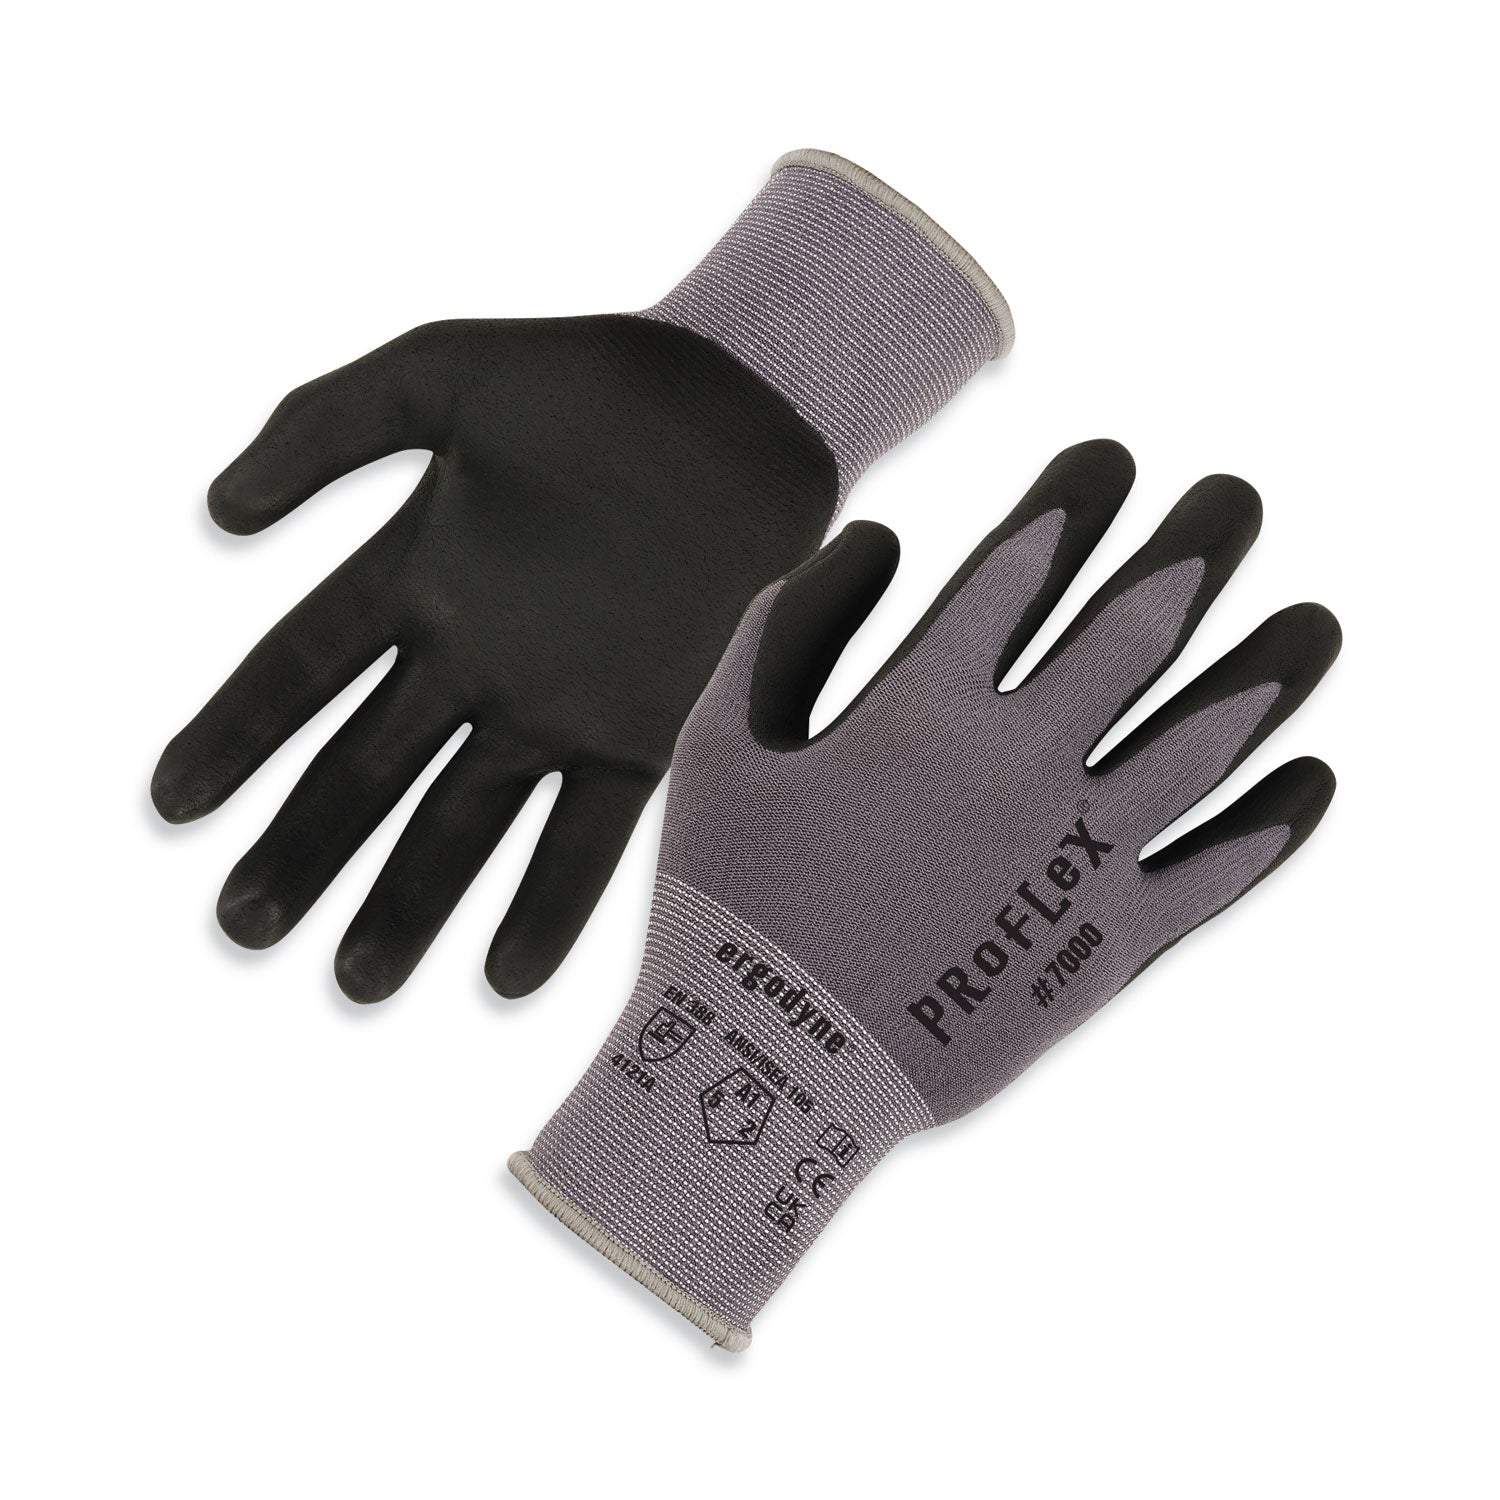 proflex-7000-nitrile-coated-gloves-microfoam-palm-gray-2x-large-pair-ships-in-1-3-business-days_ego10376 - 1